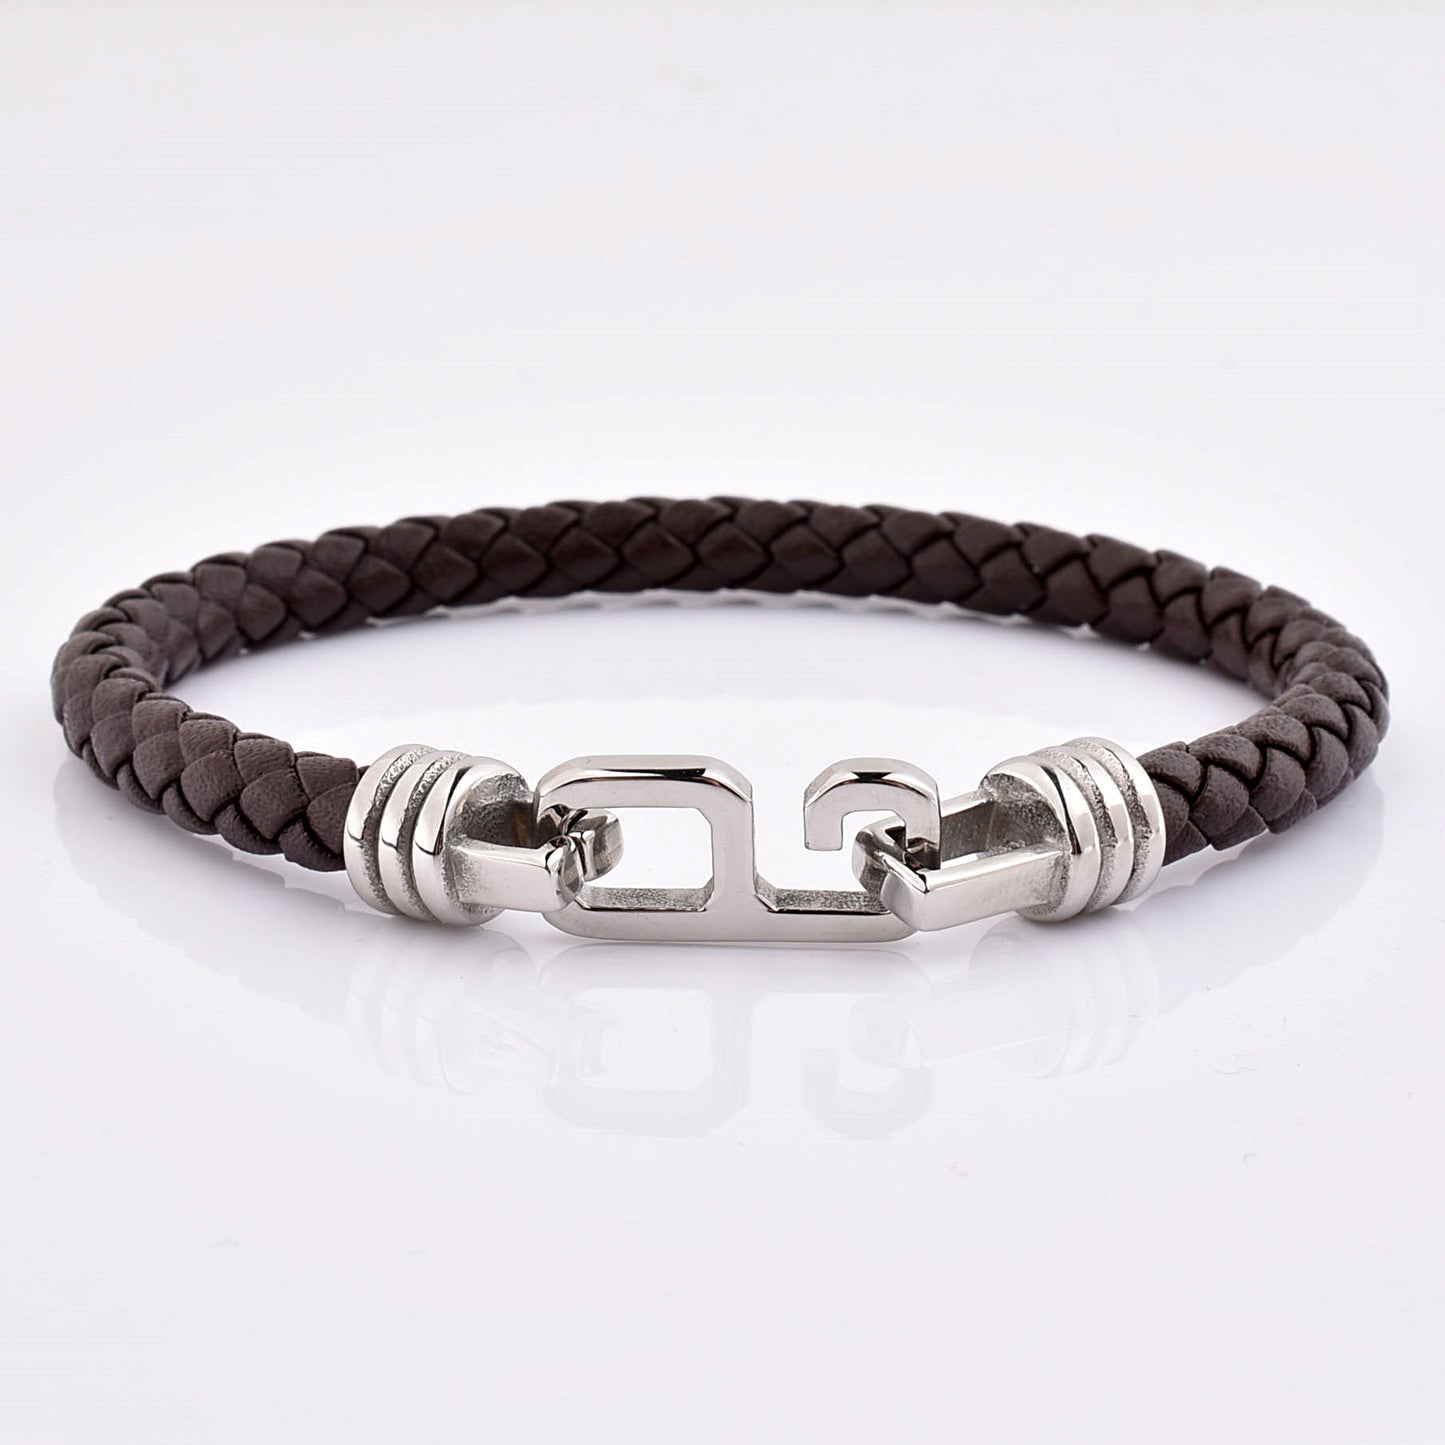 Leather with Square Hook Bracelet